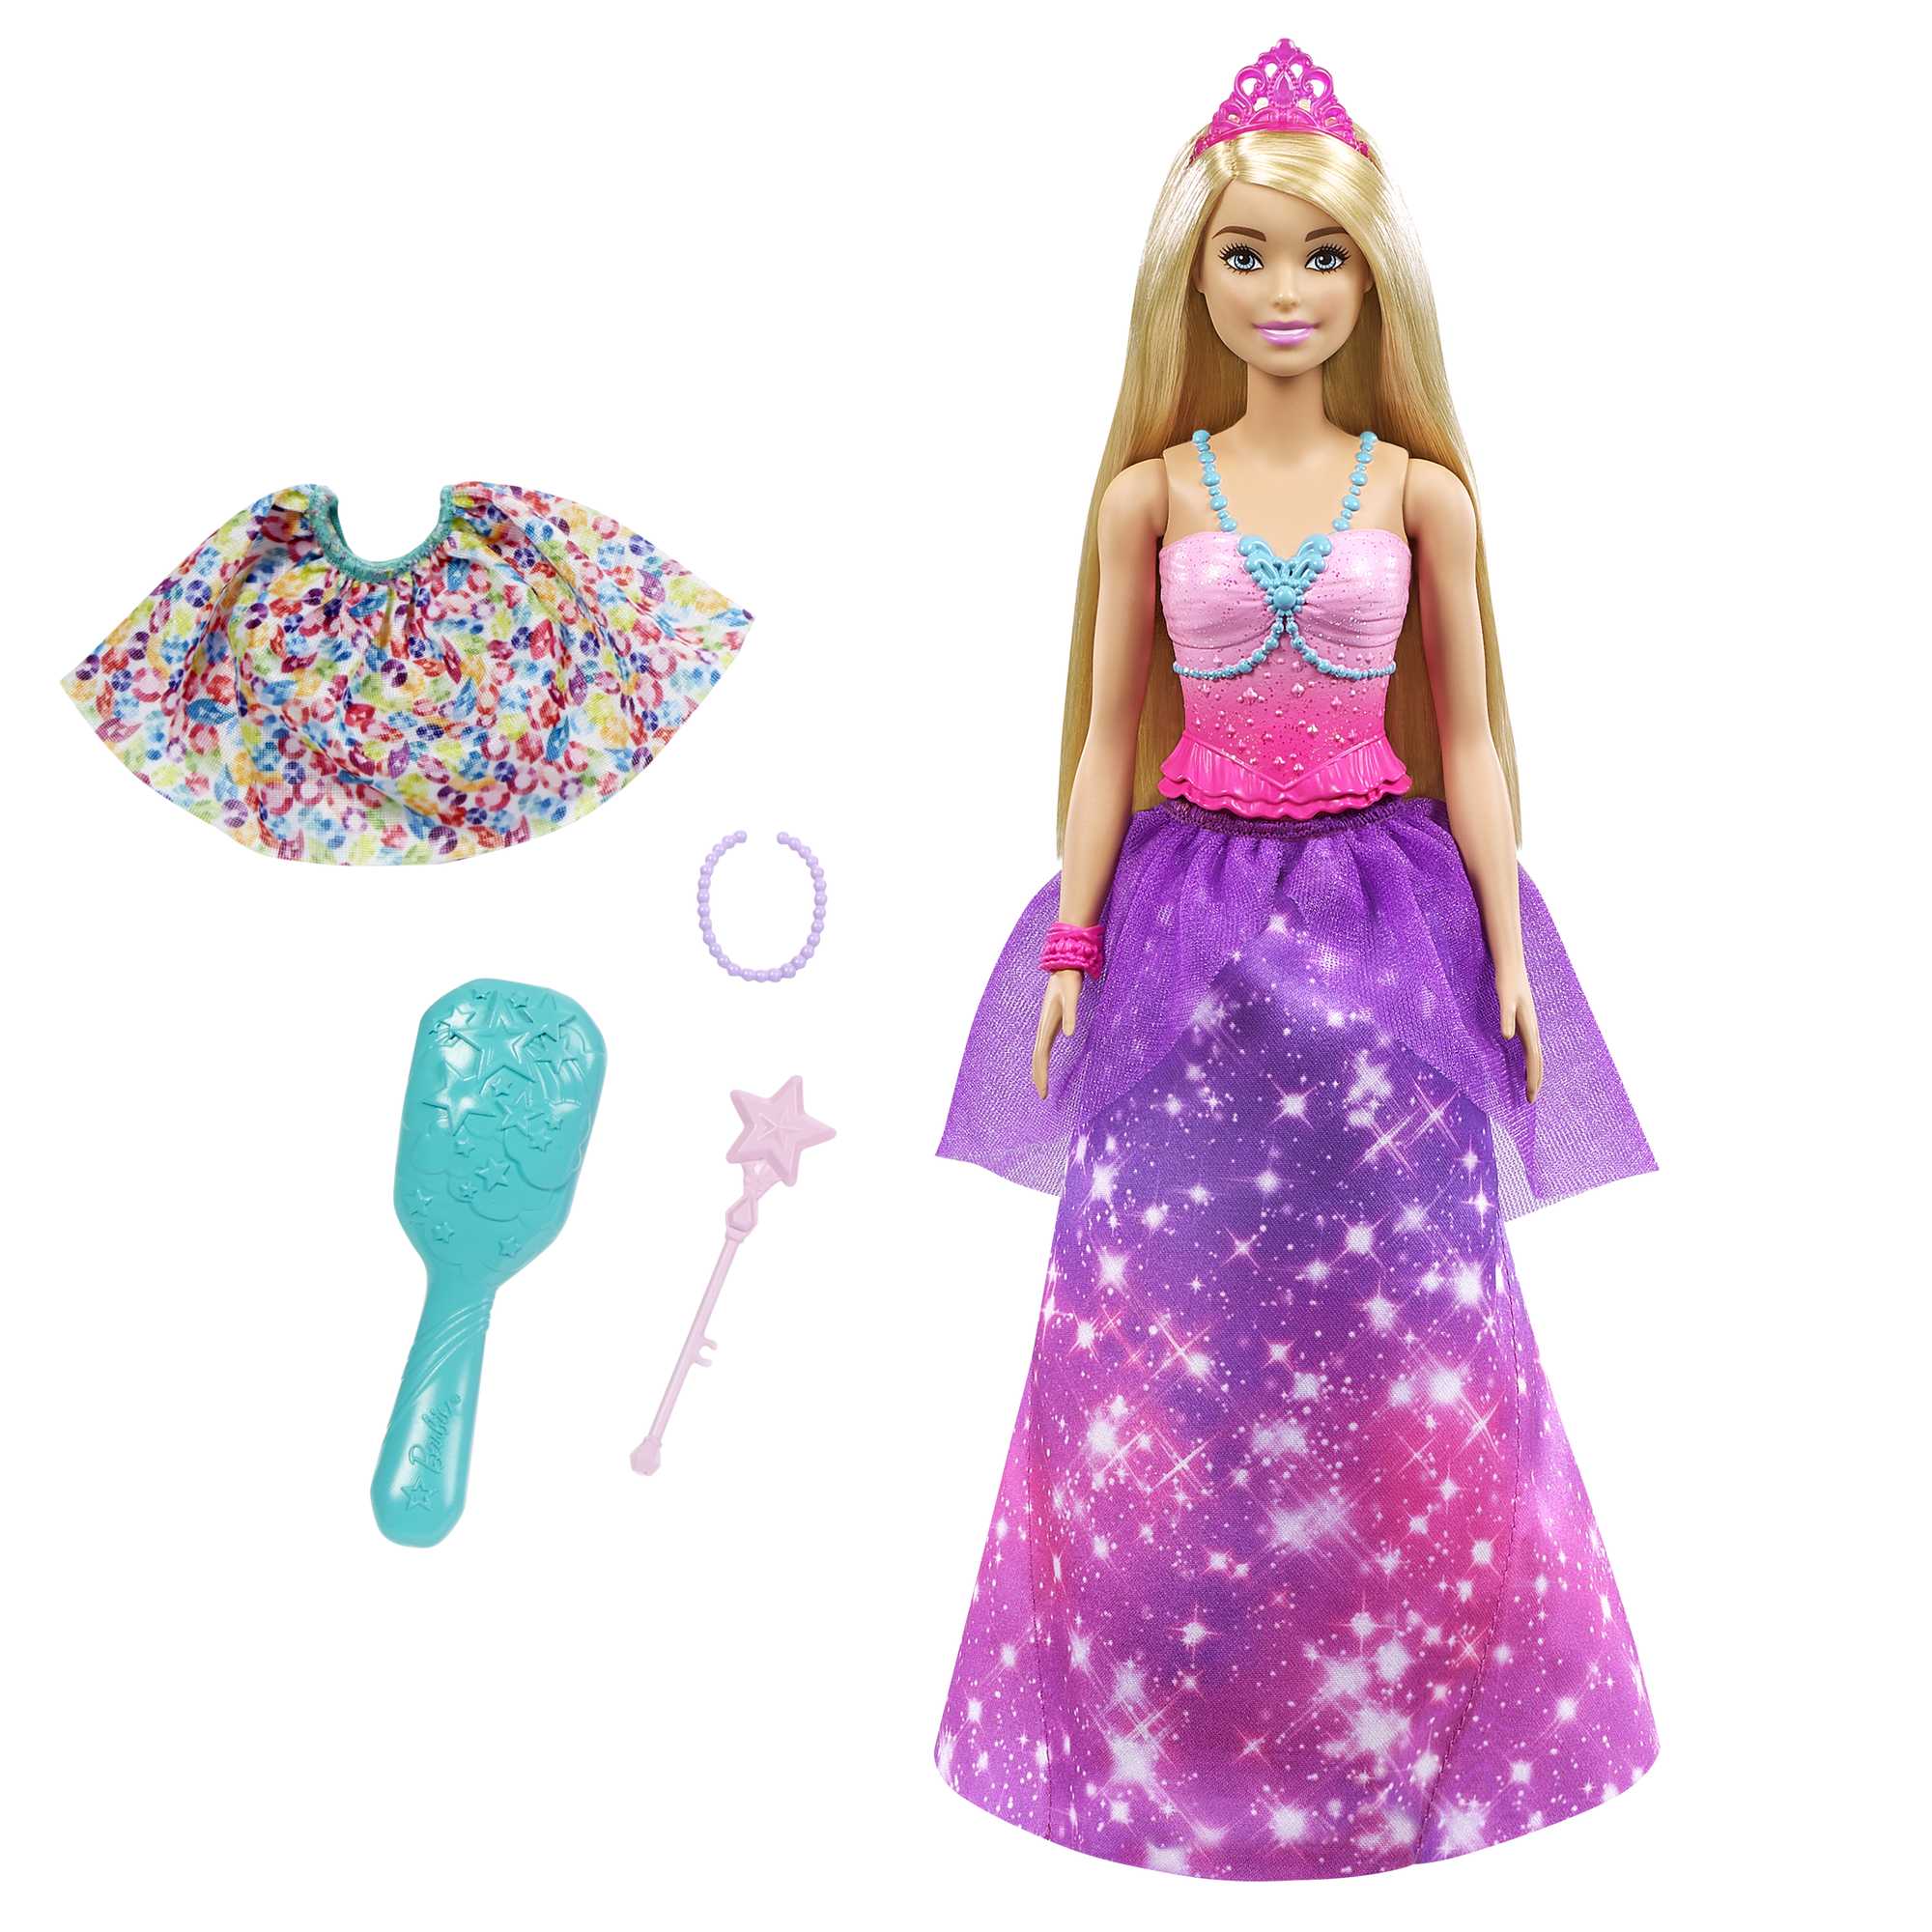 Barbie Dreamtopia 2-In-1 Royal To Mermaid Fashion Transformation Doll  (Blonde, 11.5-In)